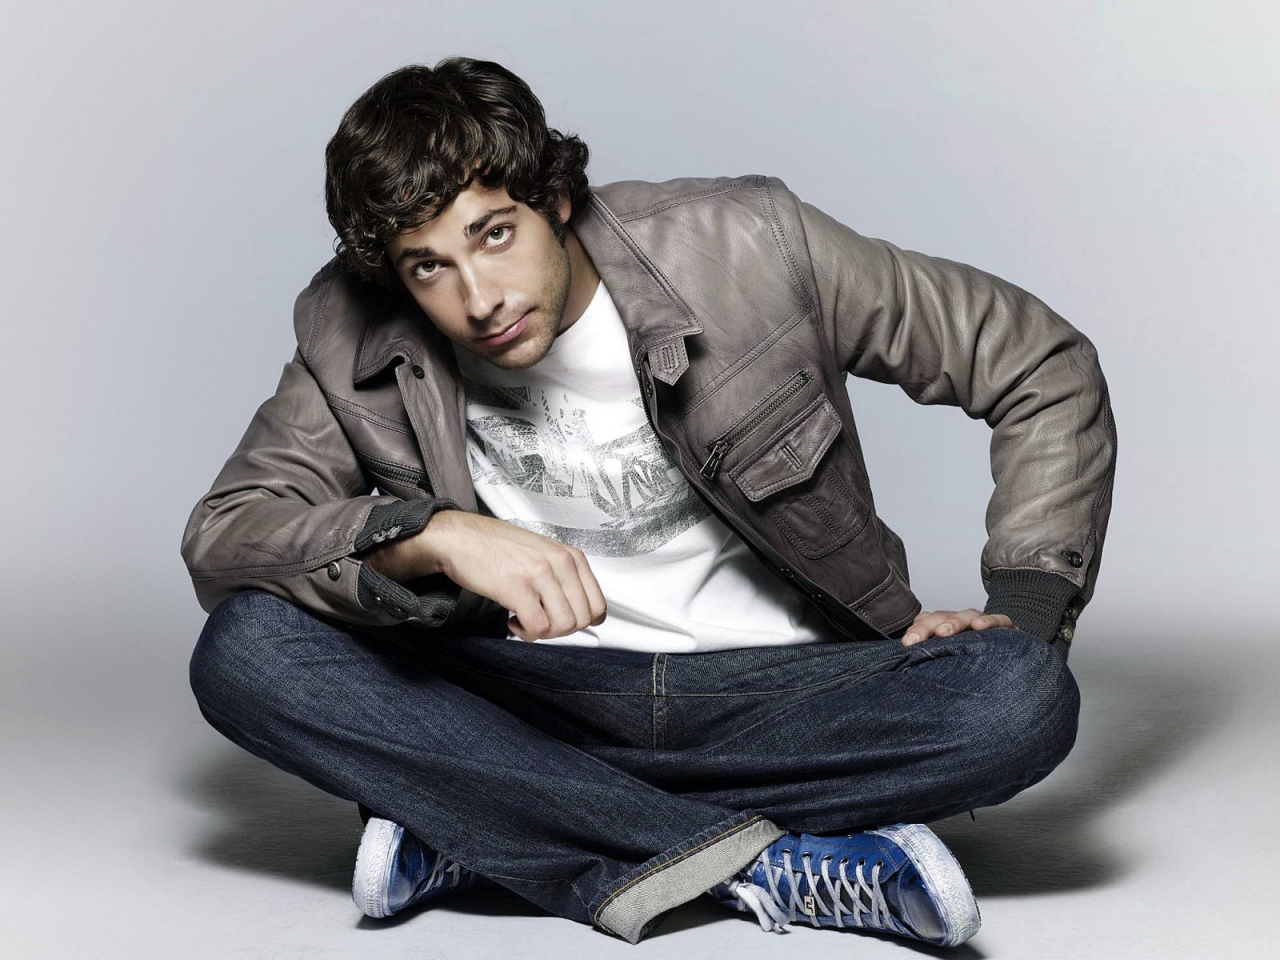 Zachary Levi Looking up for 1280 x 960 resolution